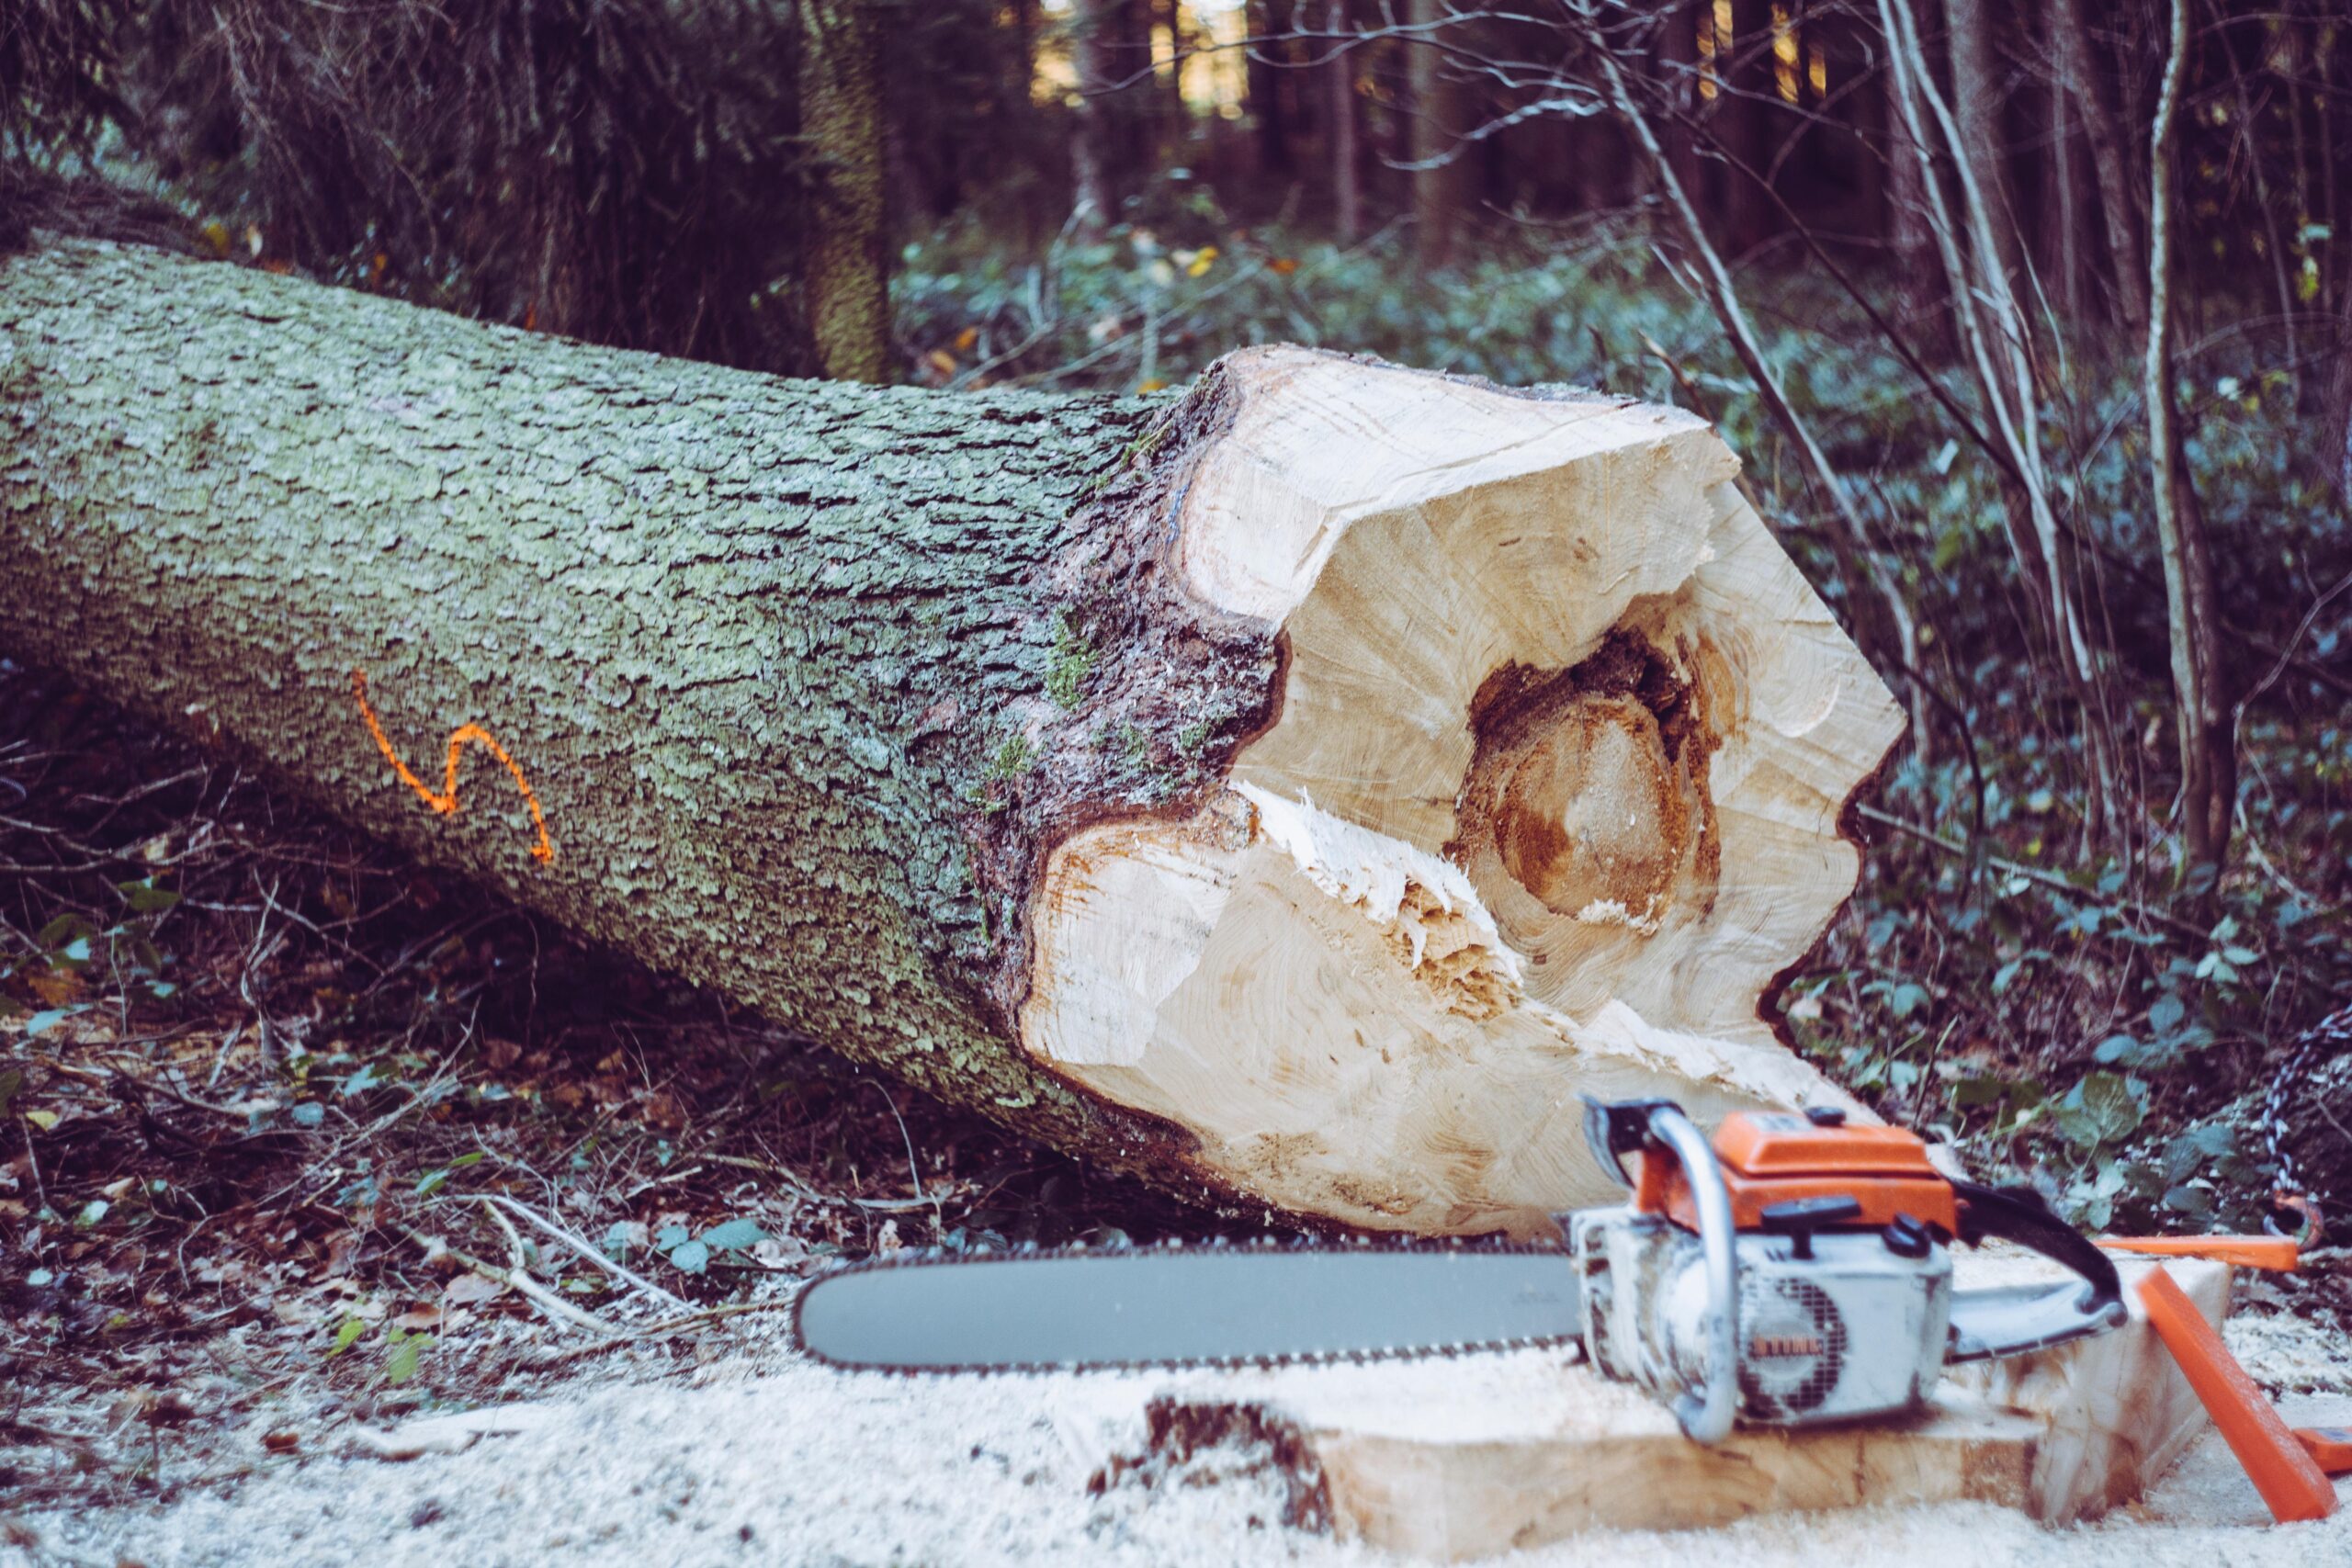 What Are The Key Responsibilities Of A Tree Surgeon?